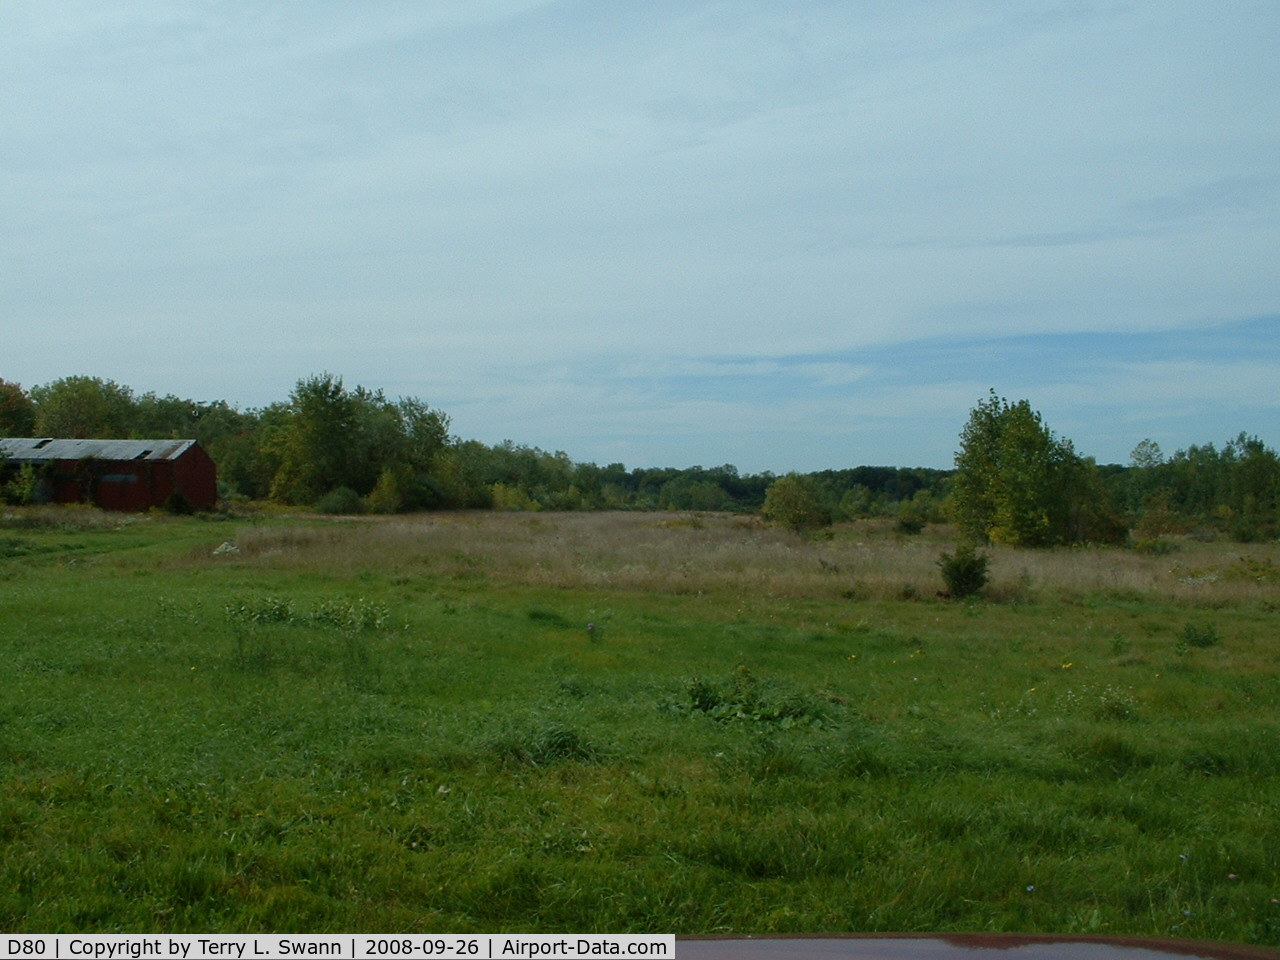 Olcott-newfane Airport (D80) - Runway is overgrown, looking east from the road.